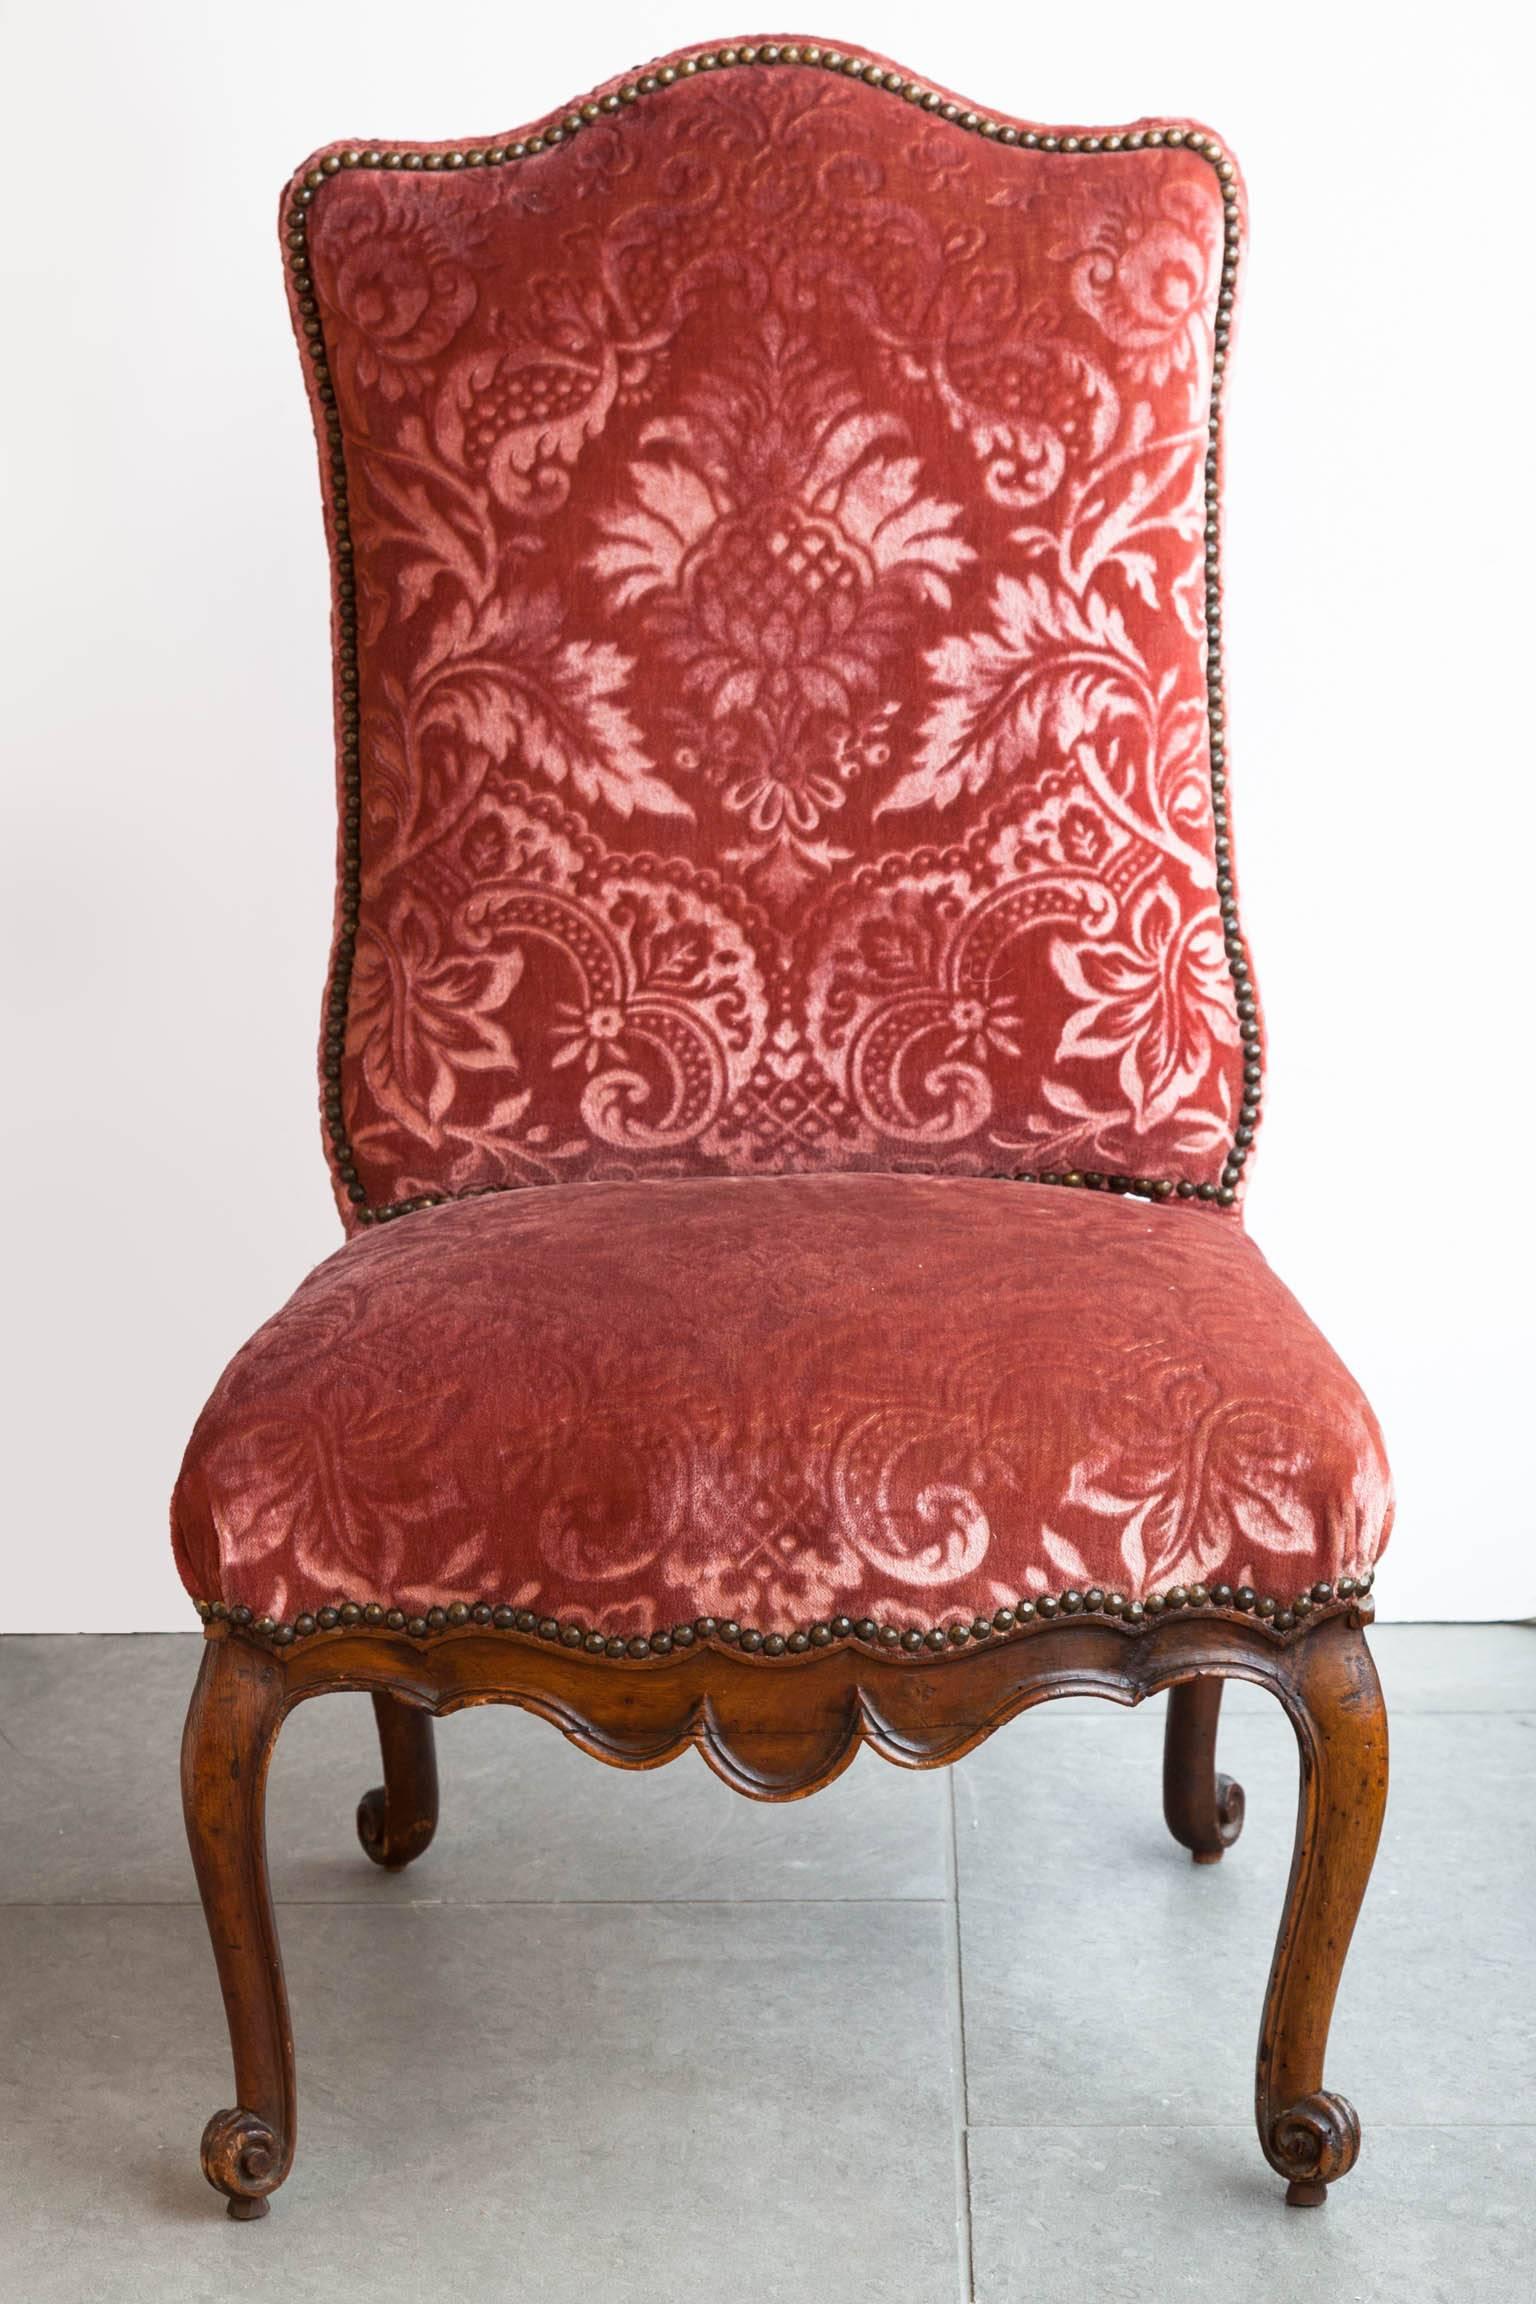 With shaped back and carved apron. Curved legs terminating in scroll feet. 
Upholstered in dark pink cut velvet. France, circa 1740.